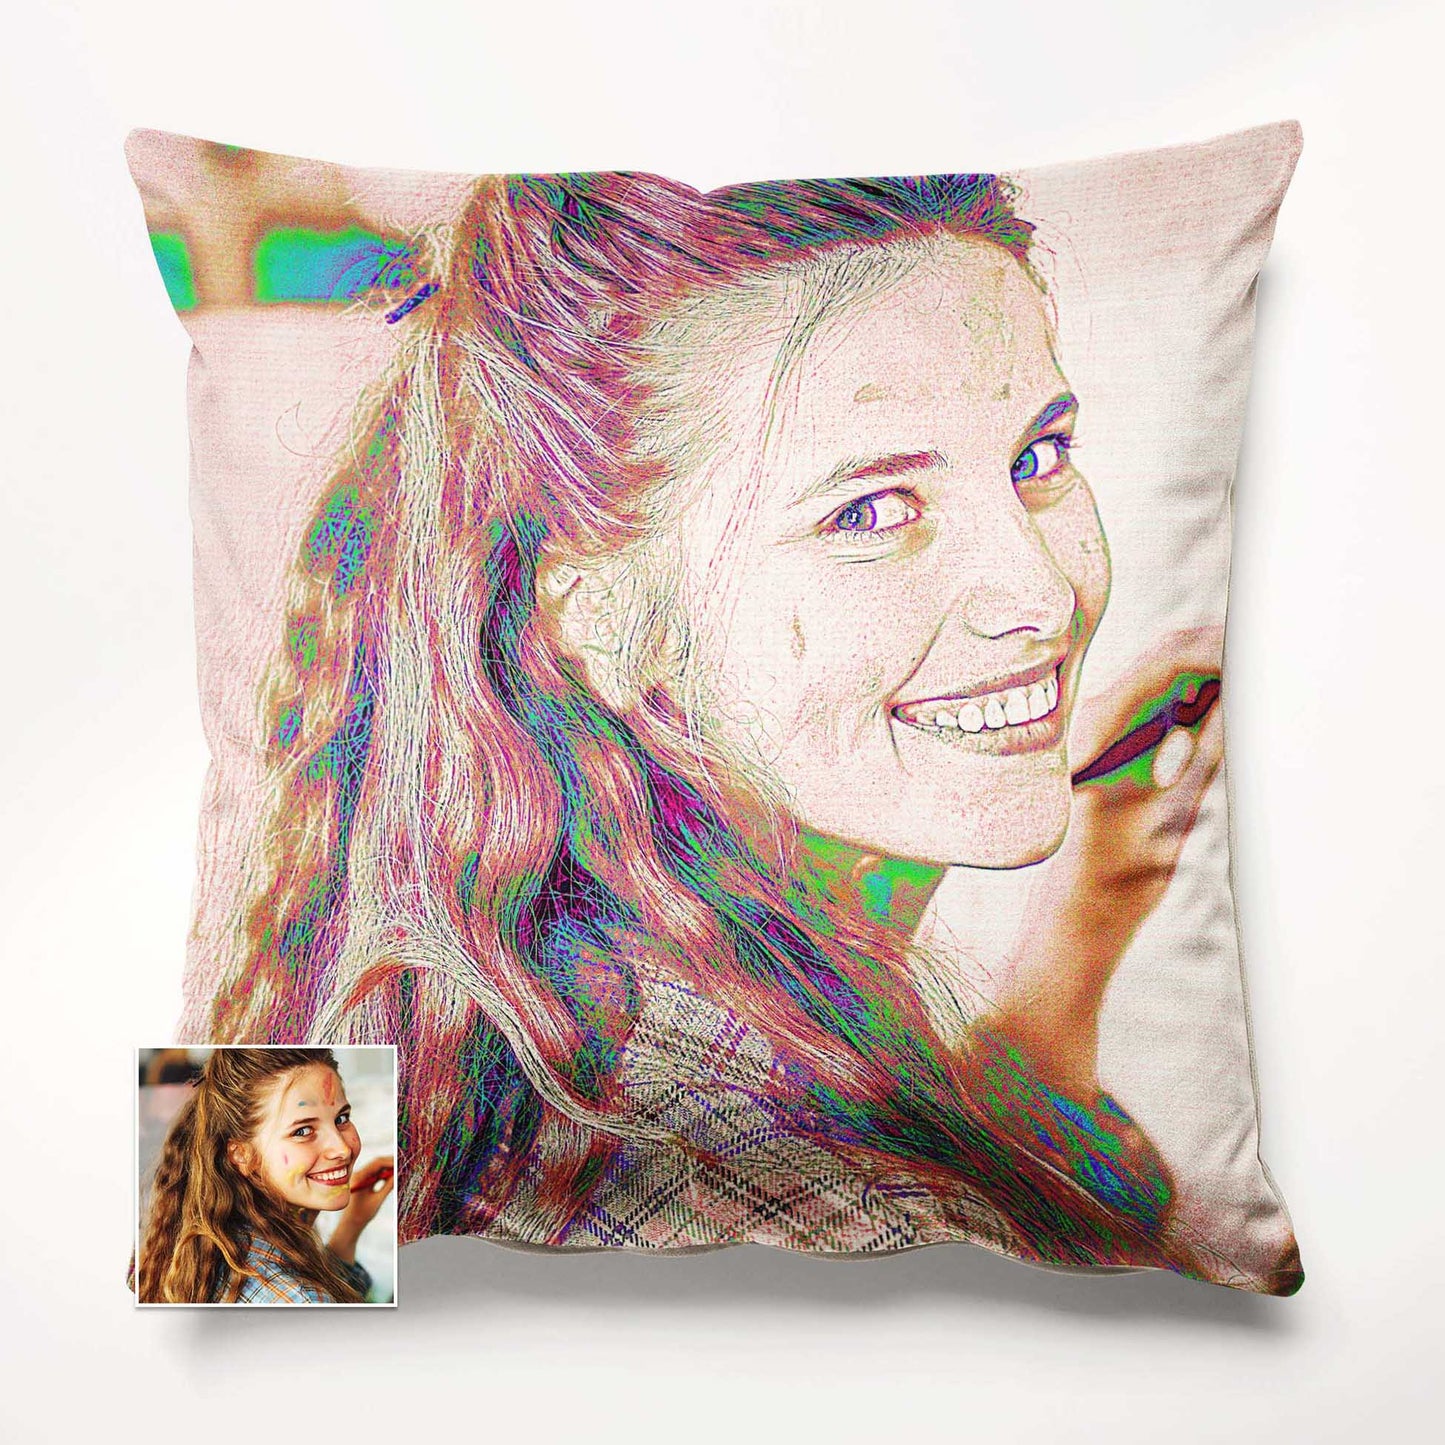 Discover the perfect blend of comfort and creativity with the Personalised Pencil Drawing Cushion. Its soft velvet fabric caresses your skin, offering a soothing touch. Printed from your photo, this handmade cushion showcases the artistry 